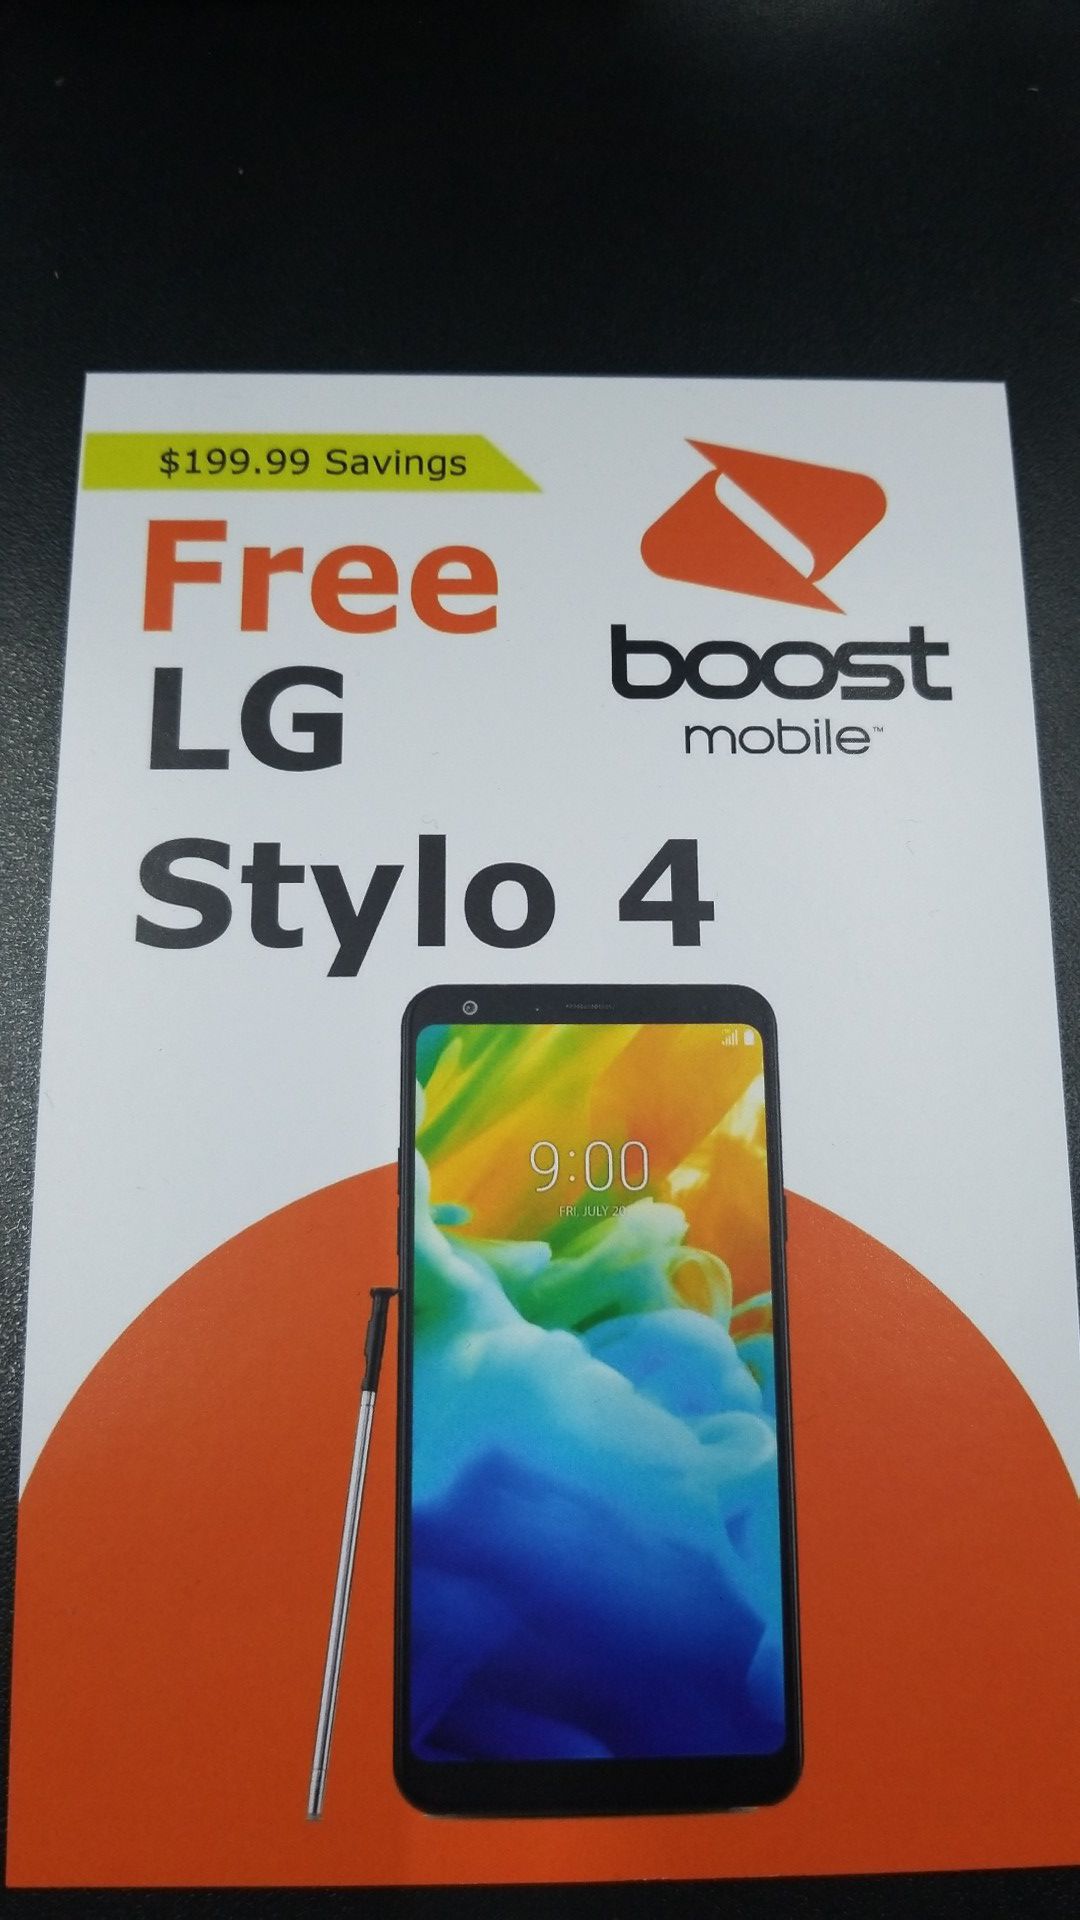 LG Sytlo 4 free when switch to boost mobile